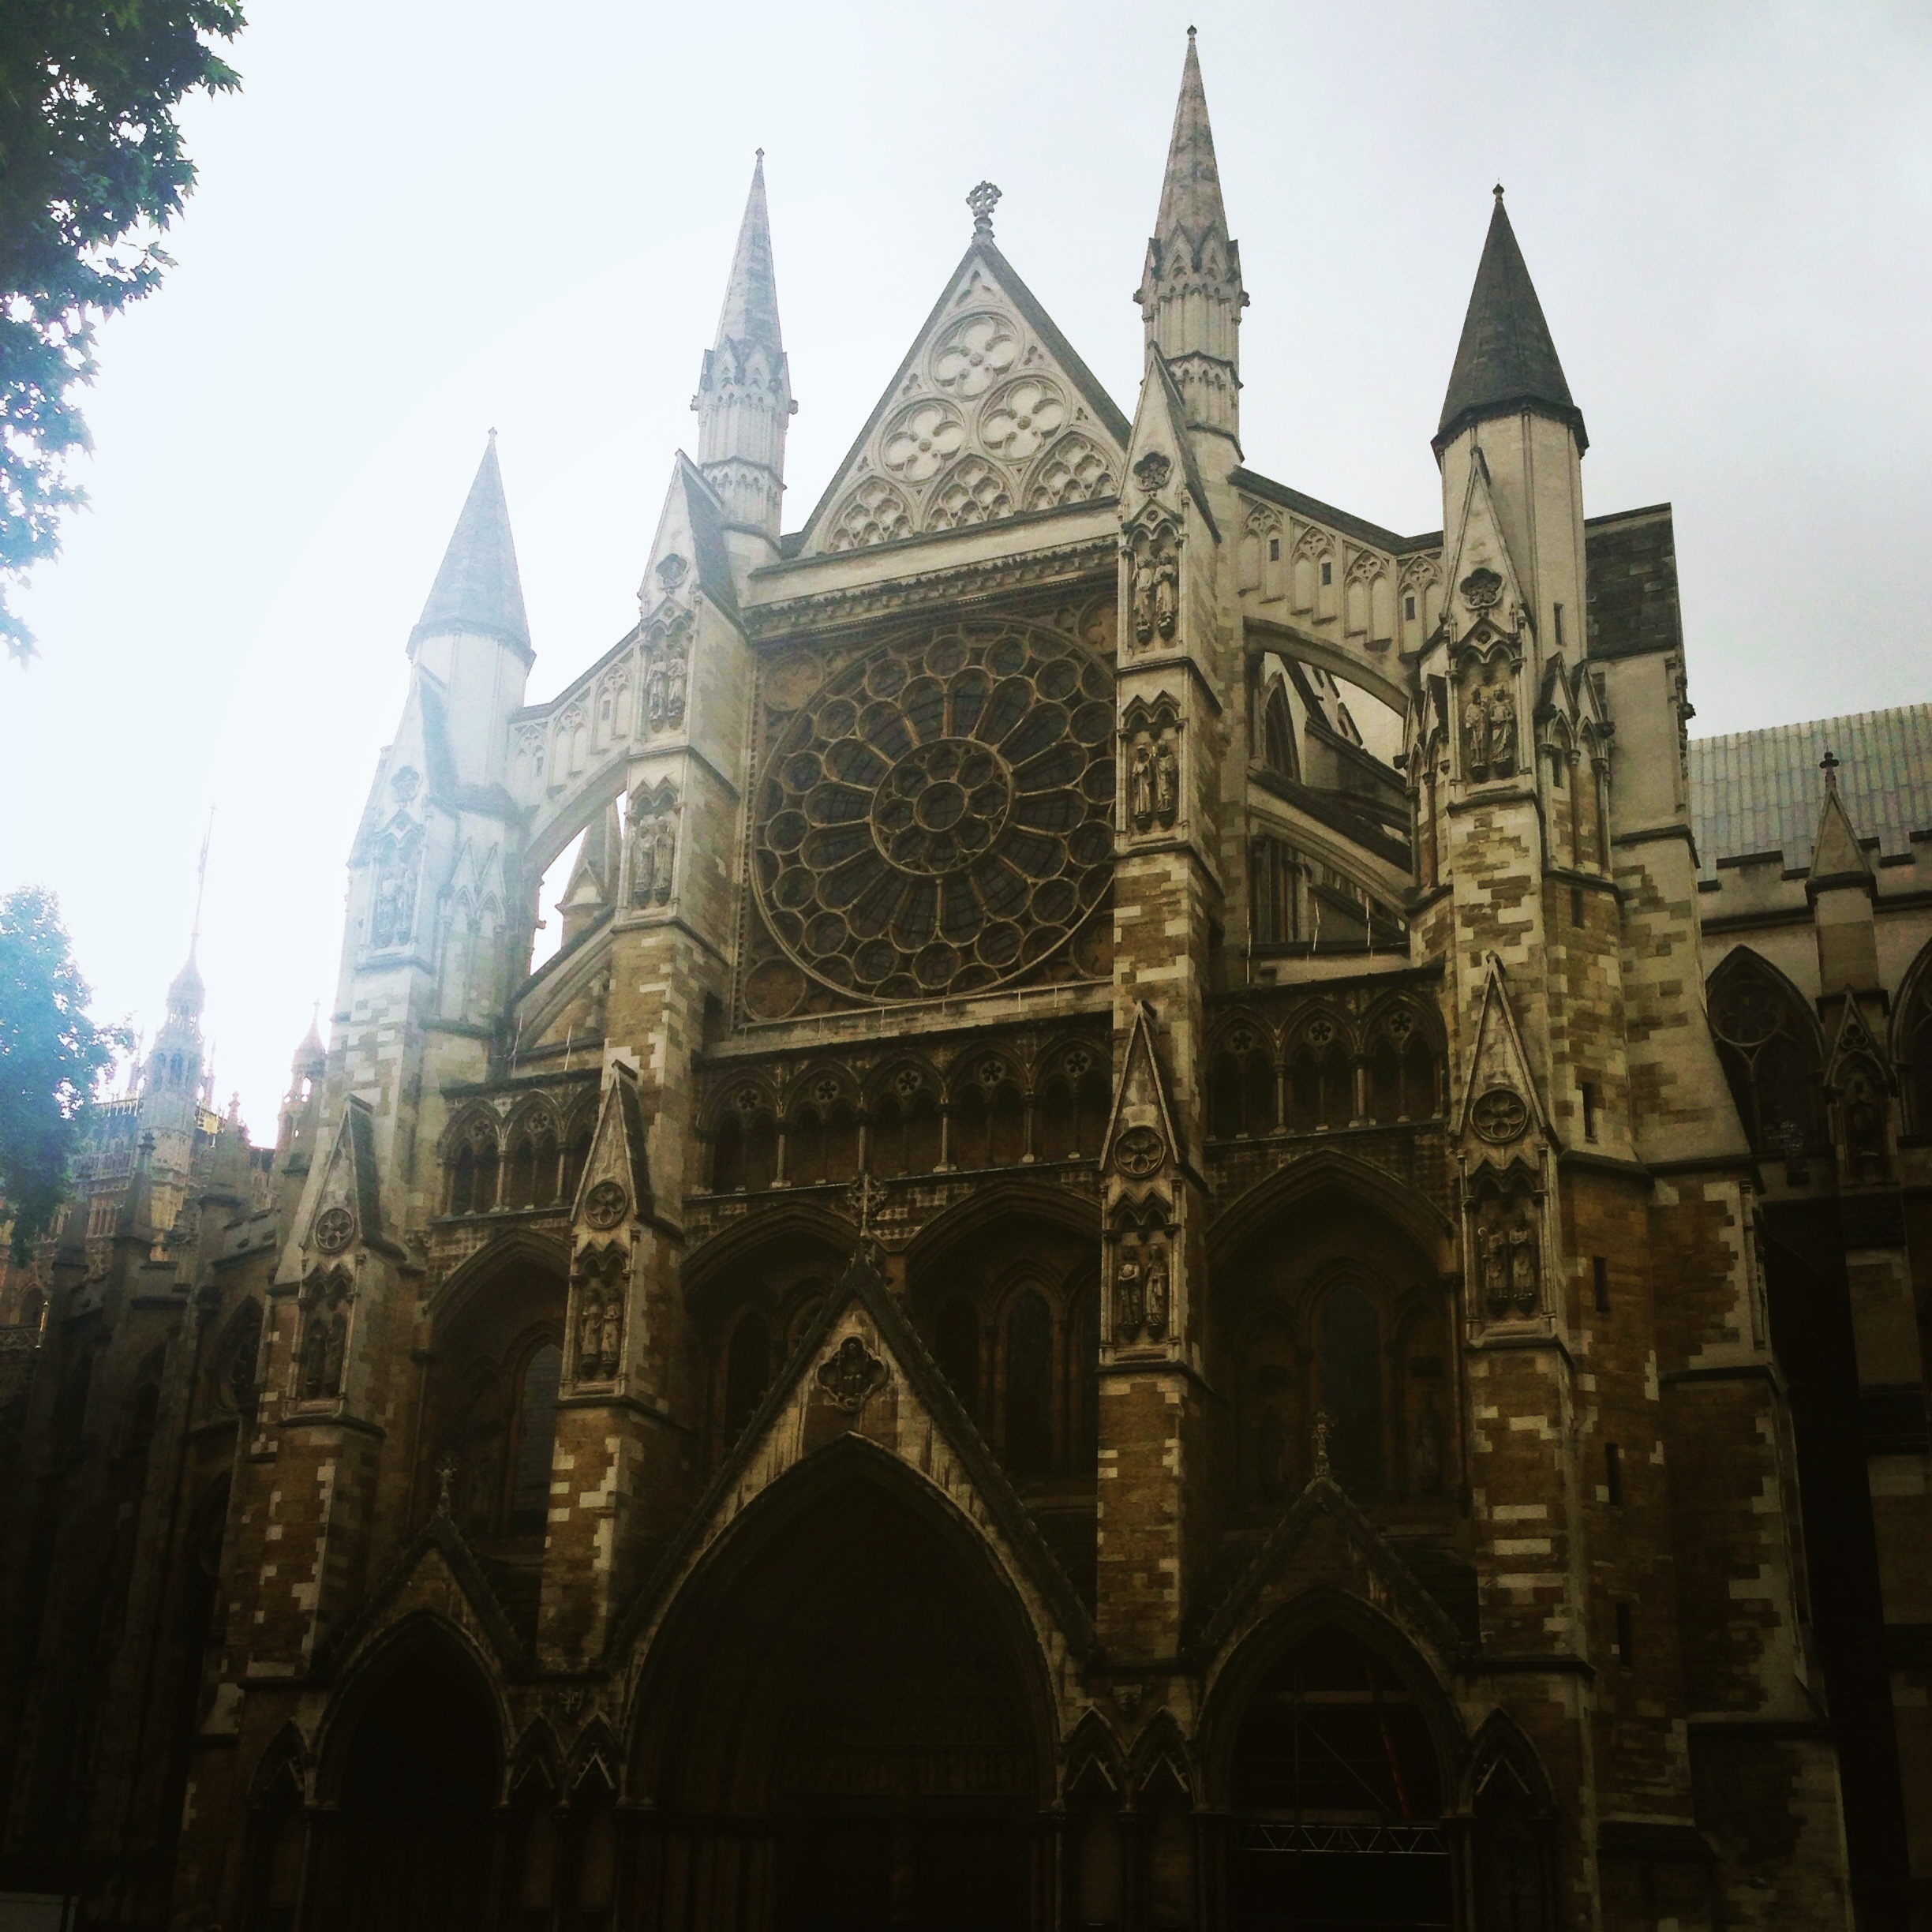 "Tried to find a Starbucks and found the queen instead #London #100happydays 28/100 at Westminster Abbey"